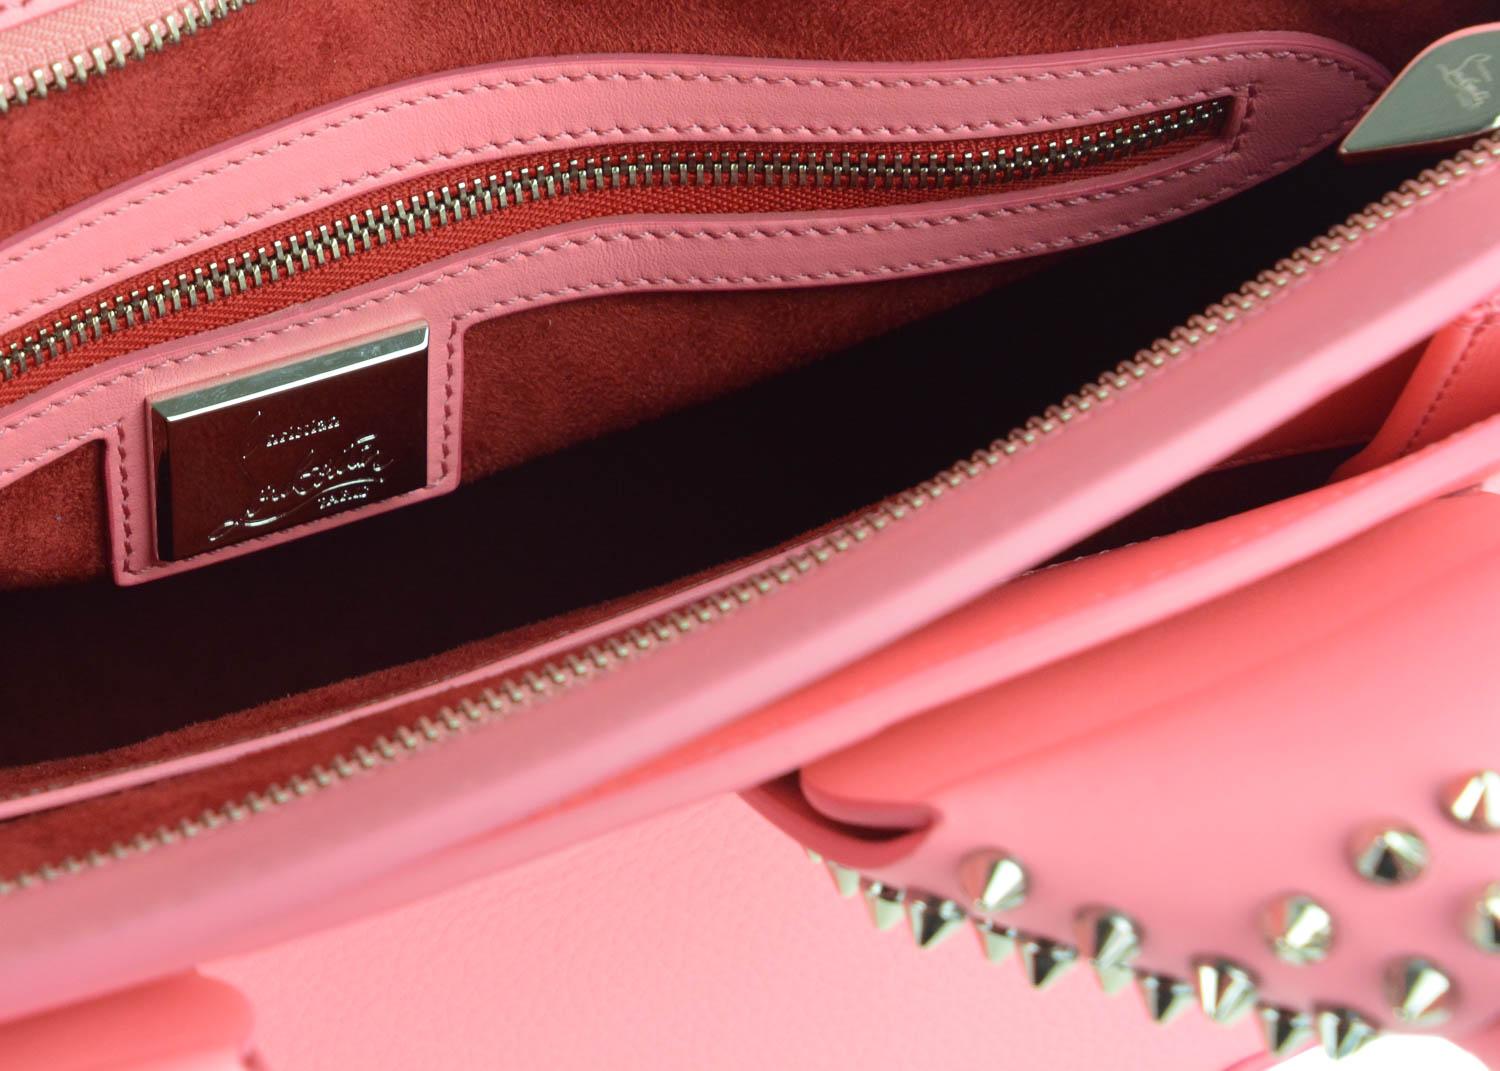 Christian Louboutin’s Eloise bag is crafted in Italy from grained calf leather in a rich Pink hue – complemented beautifully by the signature gold-tone spikes. This structured style has plenty of space for your wallet, smartphone, and make-up